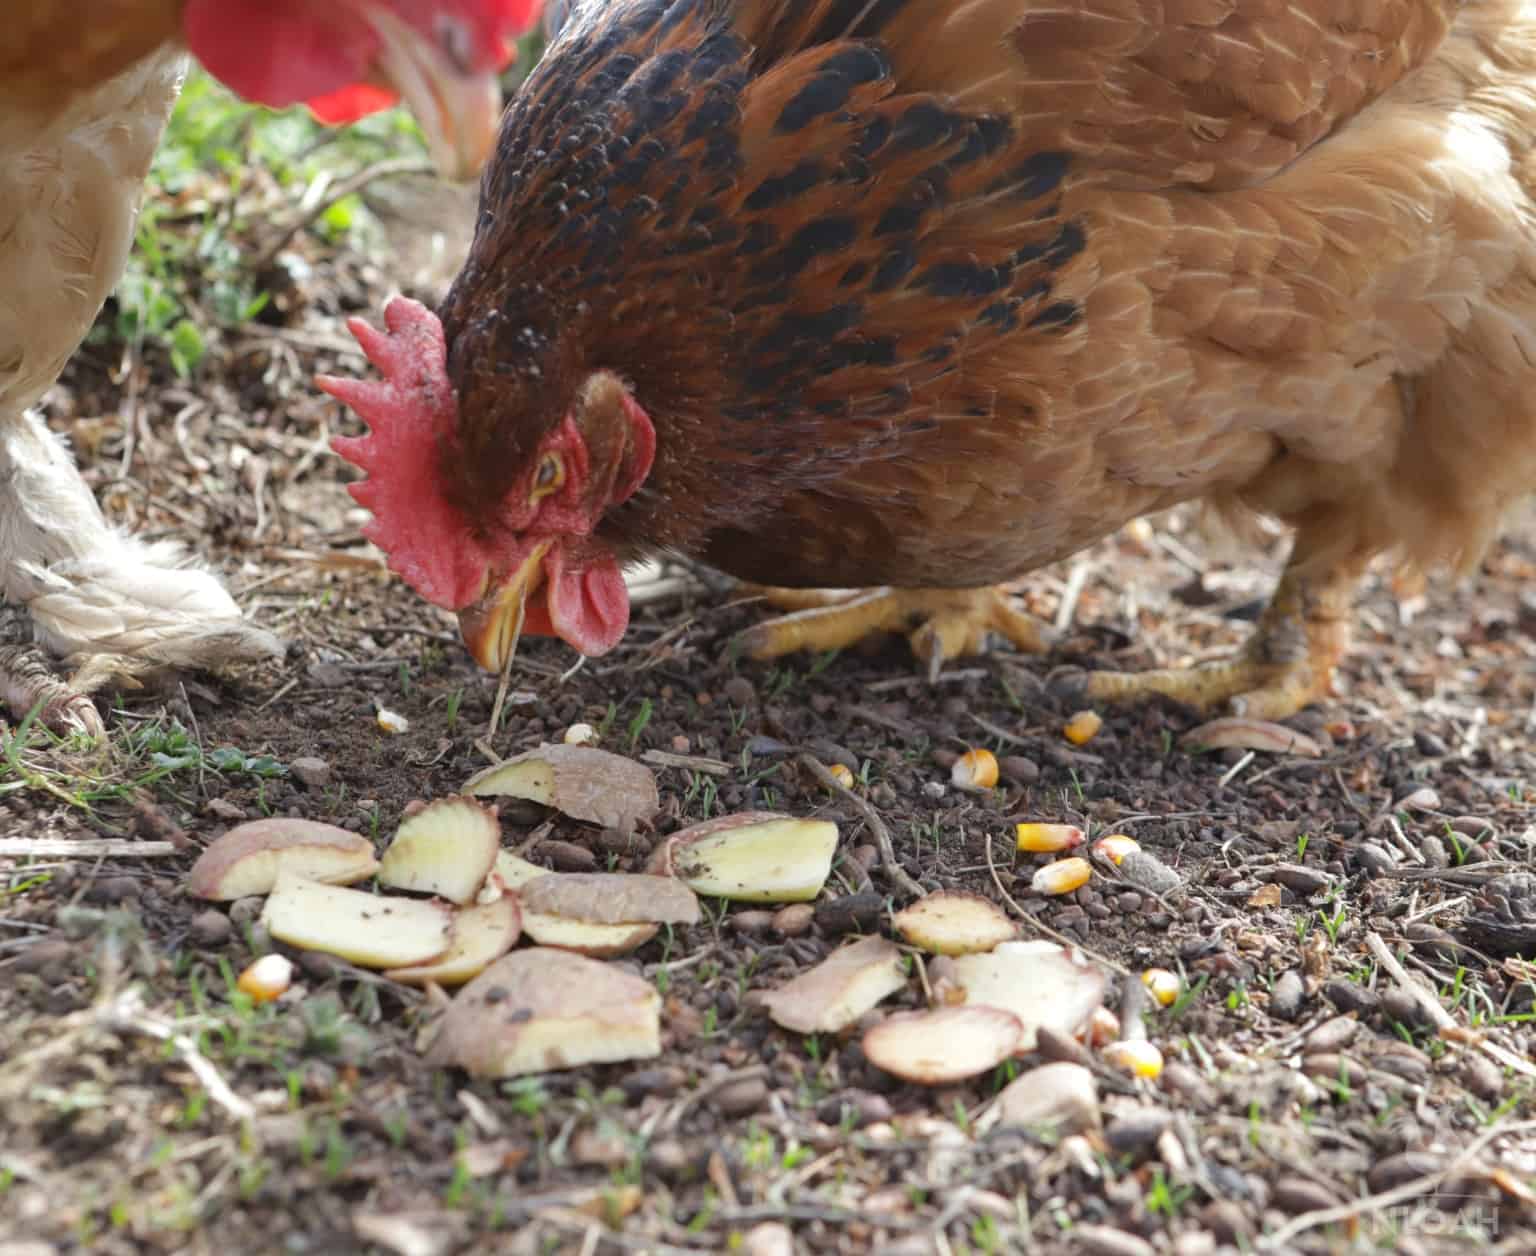 Why some chicken keepers avoid potatoes altogether